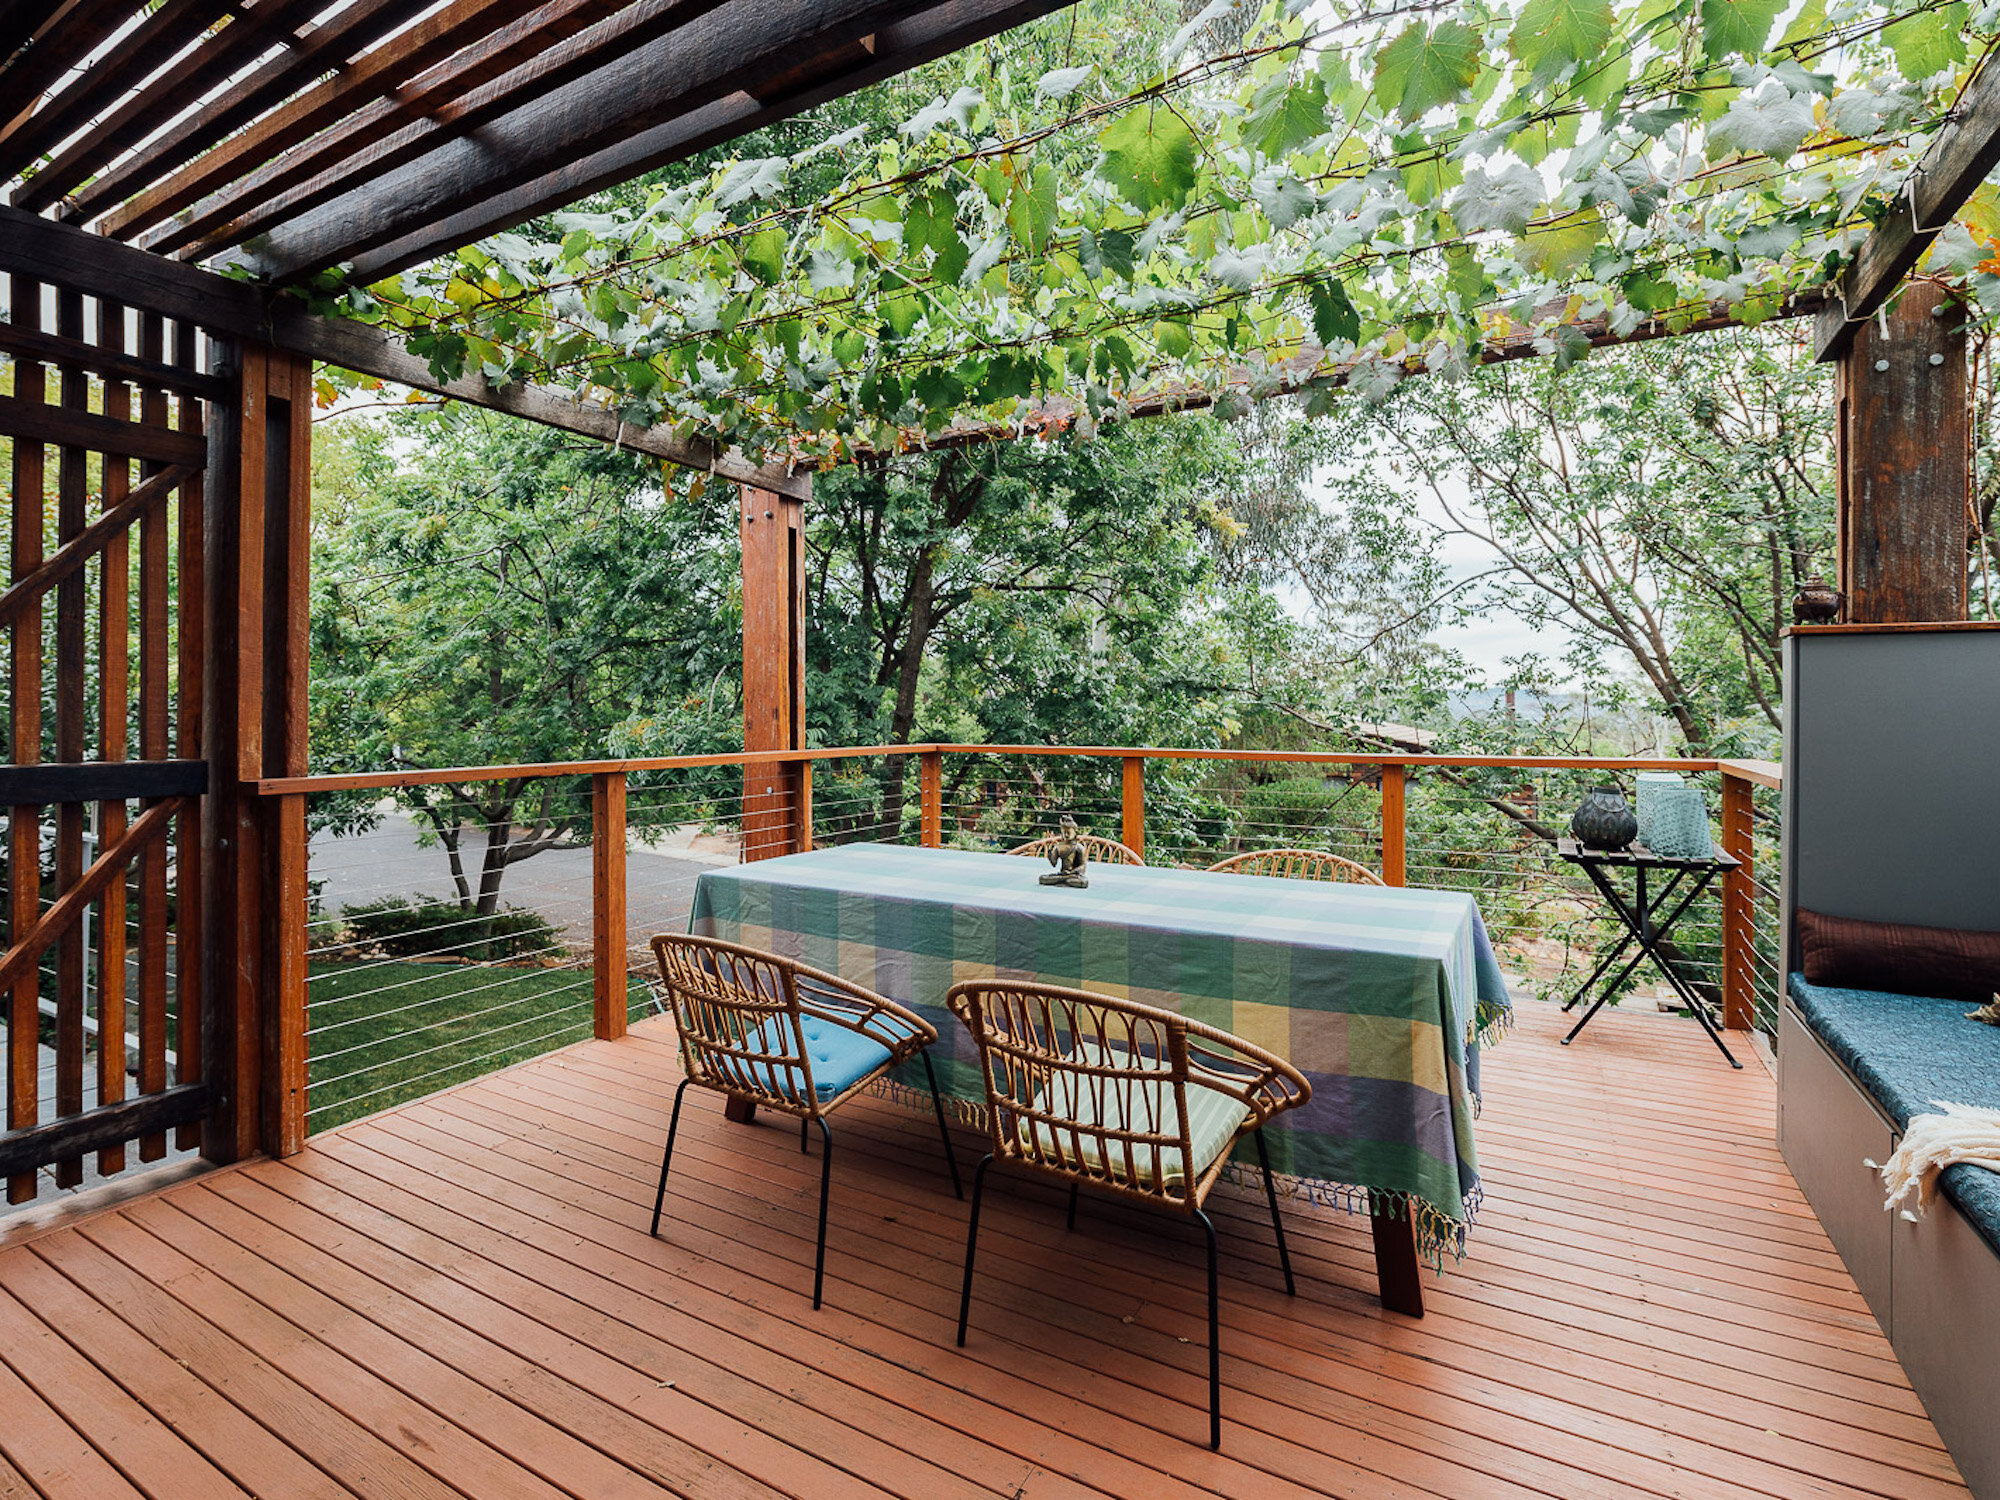 A lovely timber deck with a table and chairs in the middle, surrounded with green plant leaves